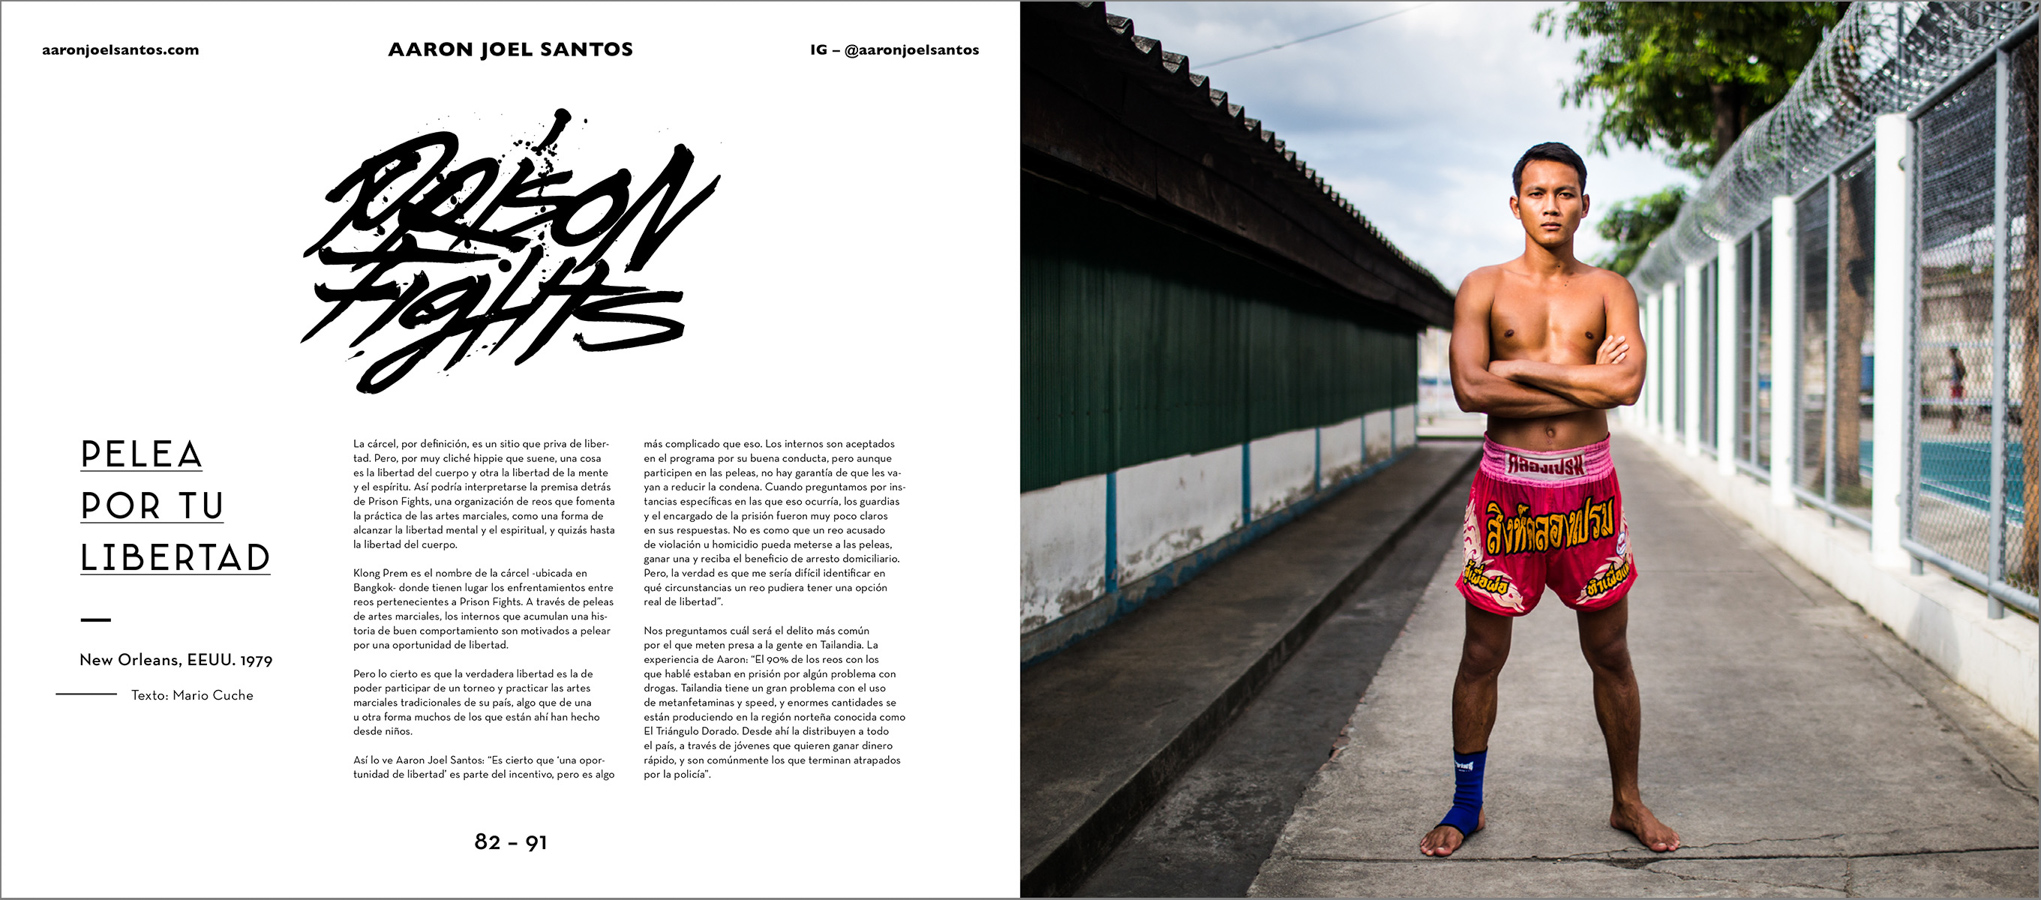 Tearsheets from a documentary series on muay thai in a Thailand prison.